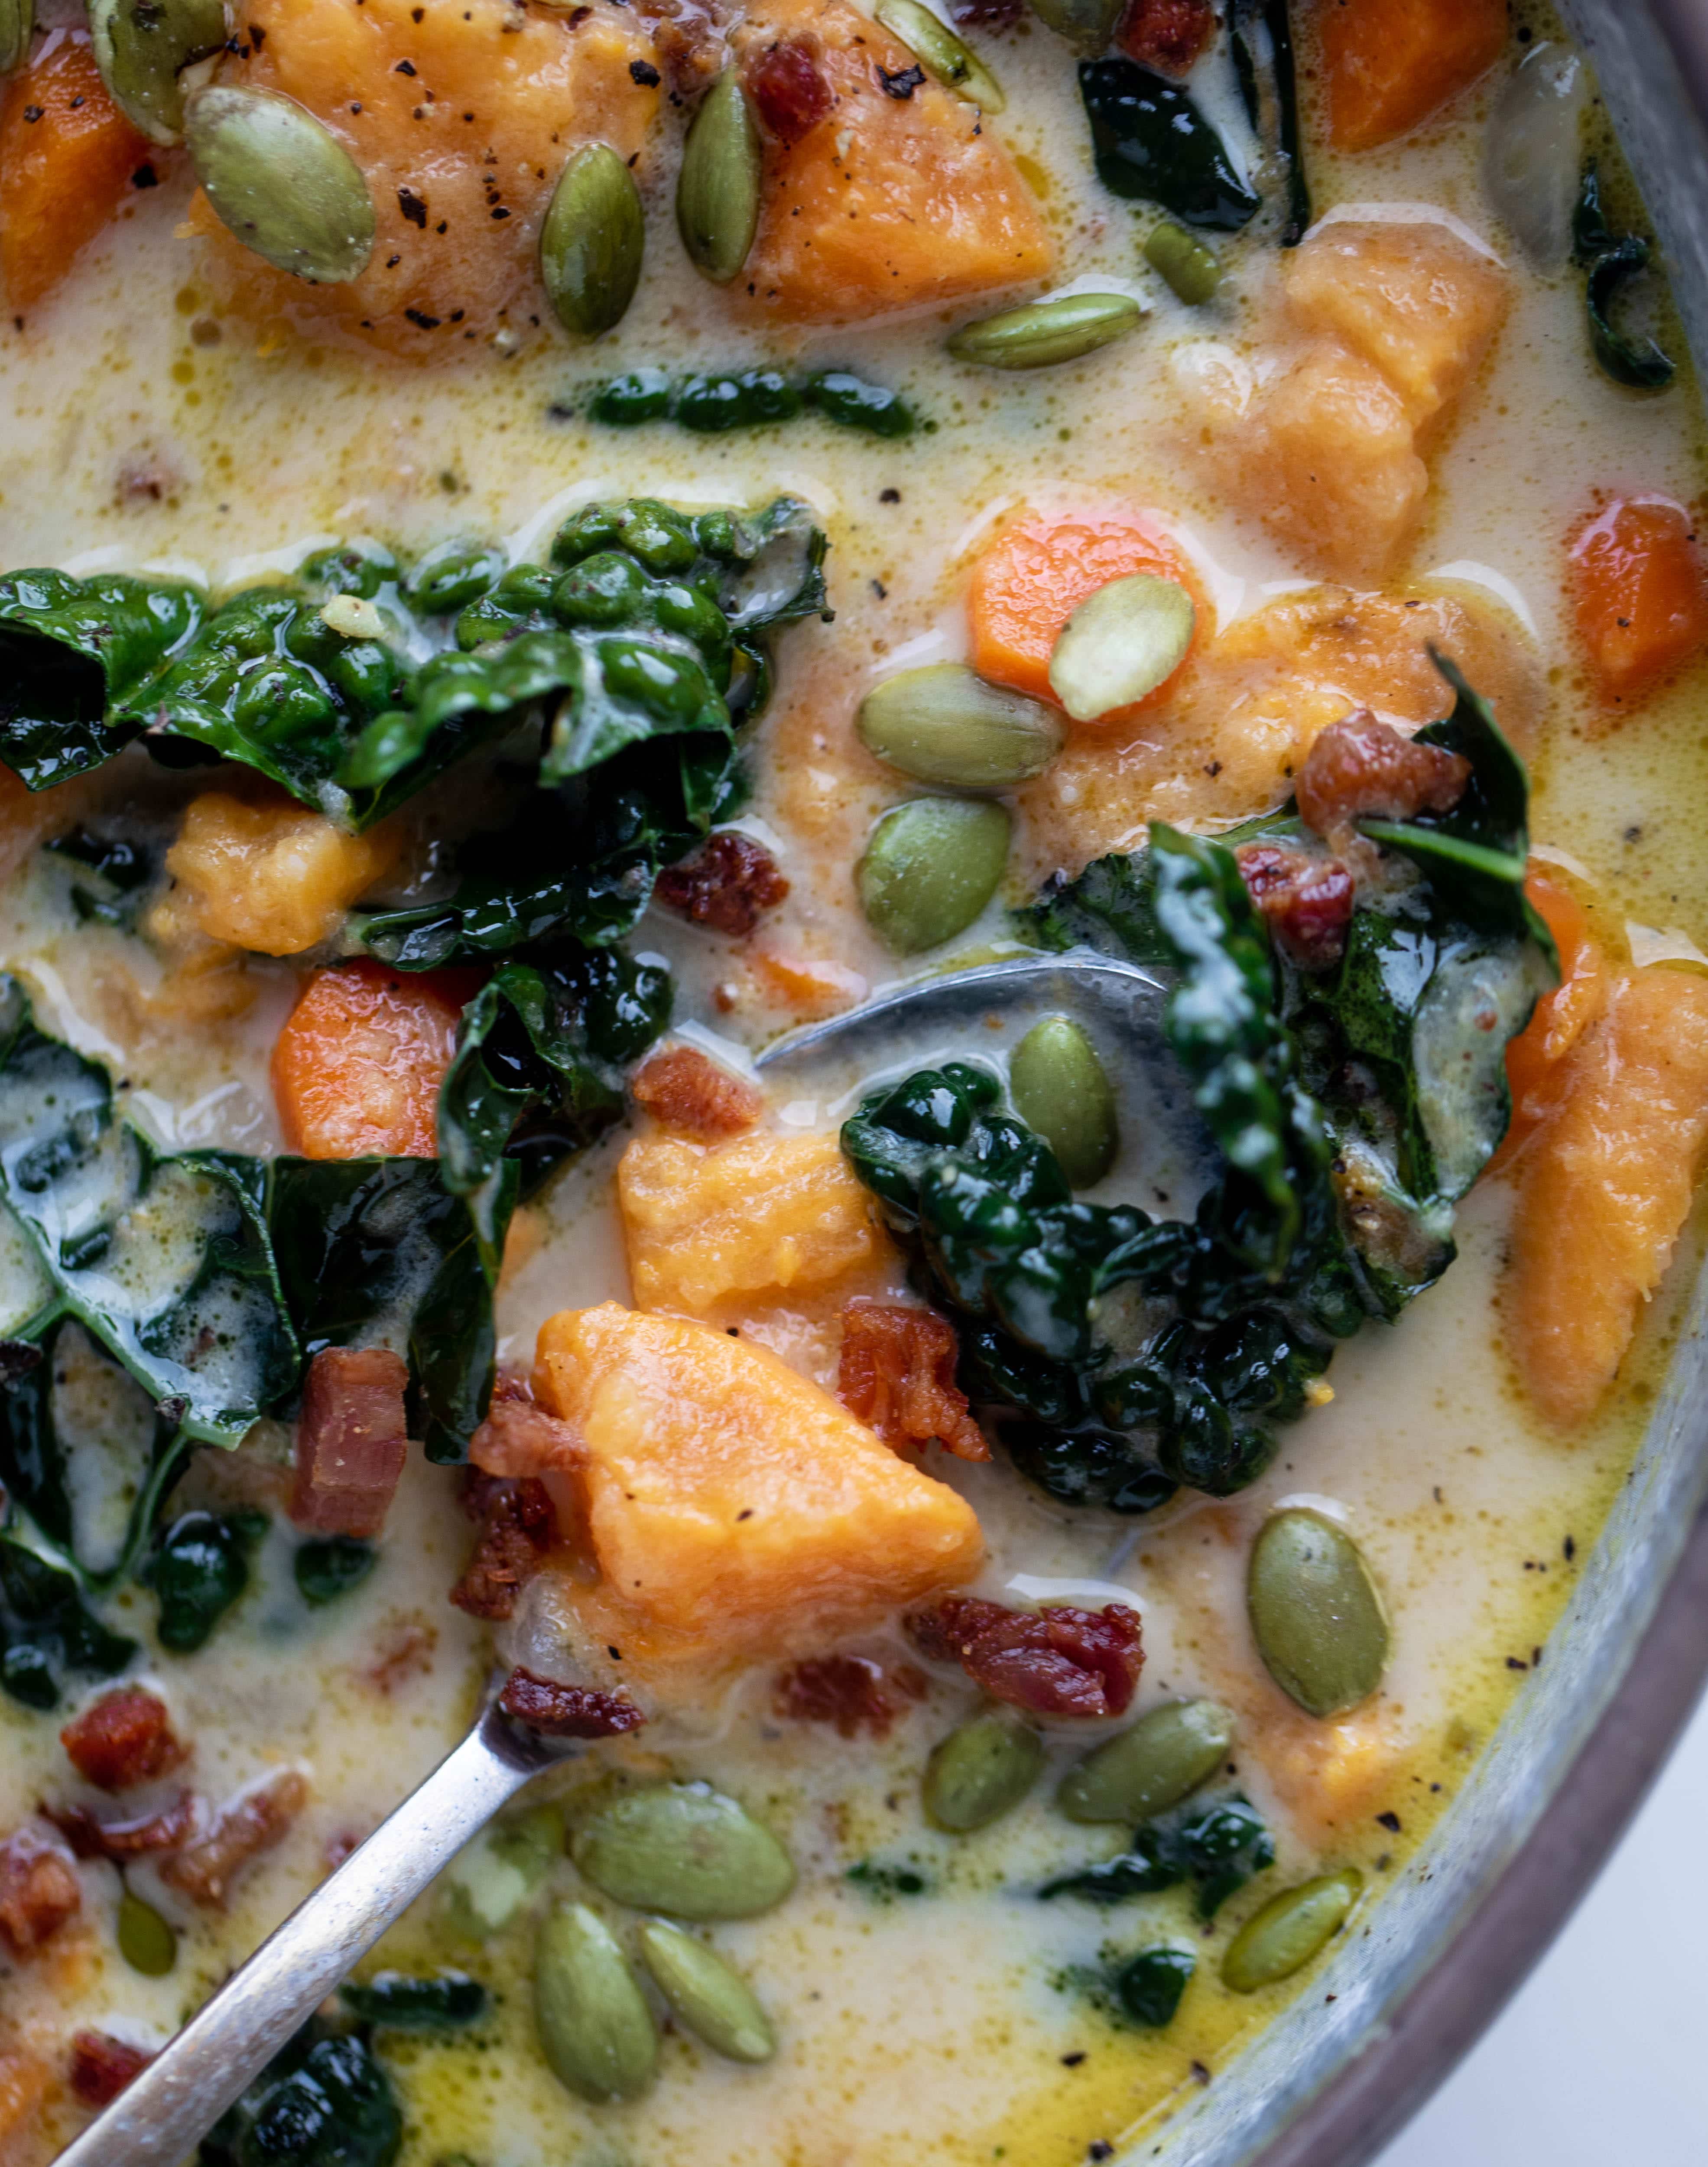 This sweet potato chowder is a hug in a bowl! Made with lots of greens and crunchy pancetta and pepitas for topping, it's a perfect weeknight meal.